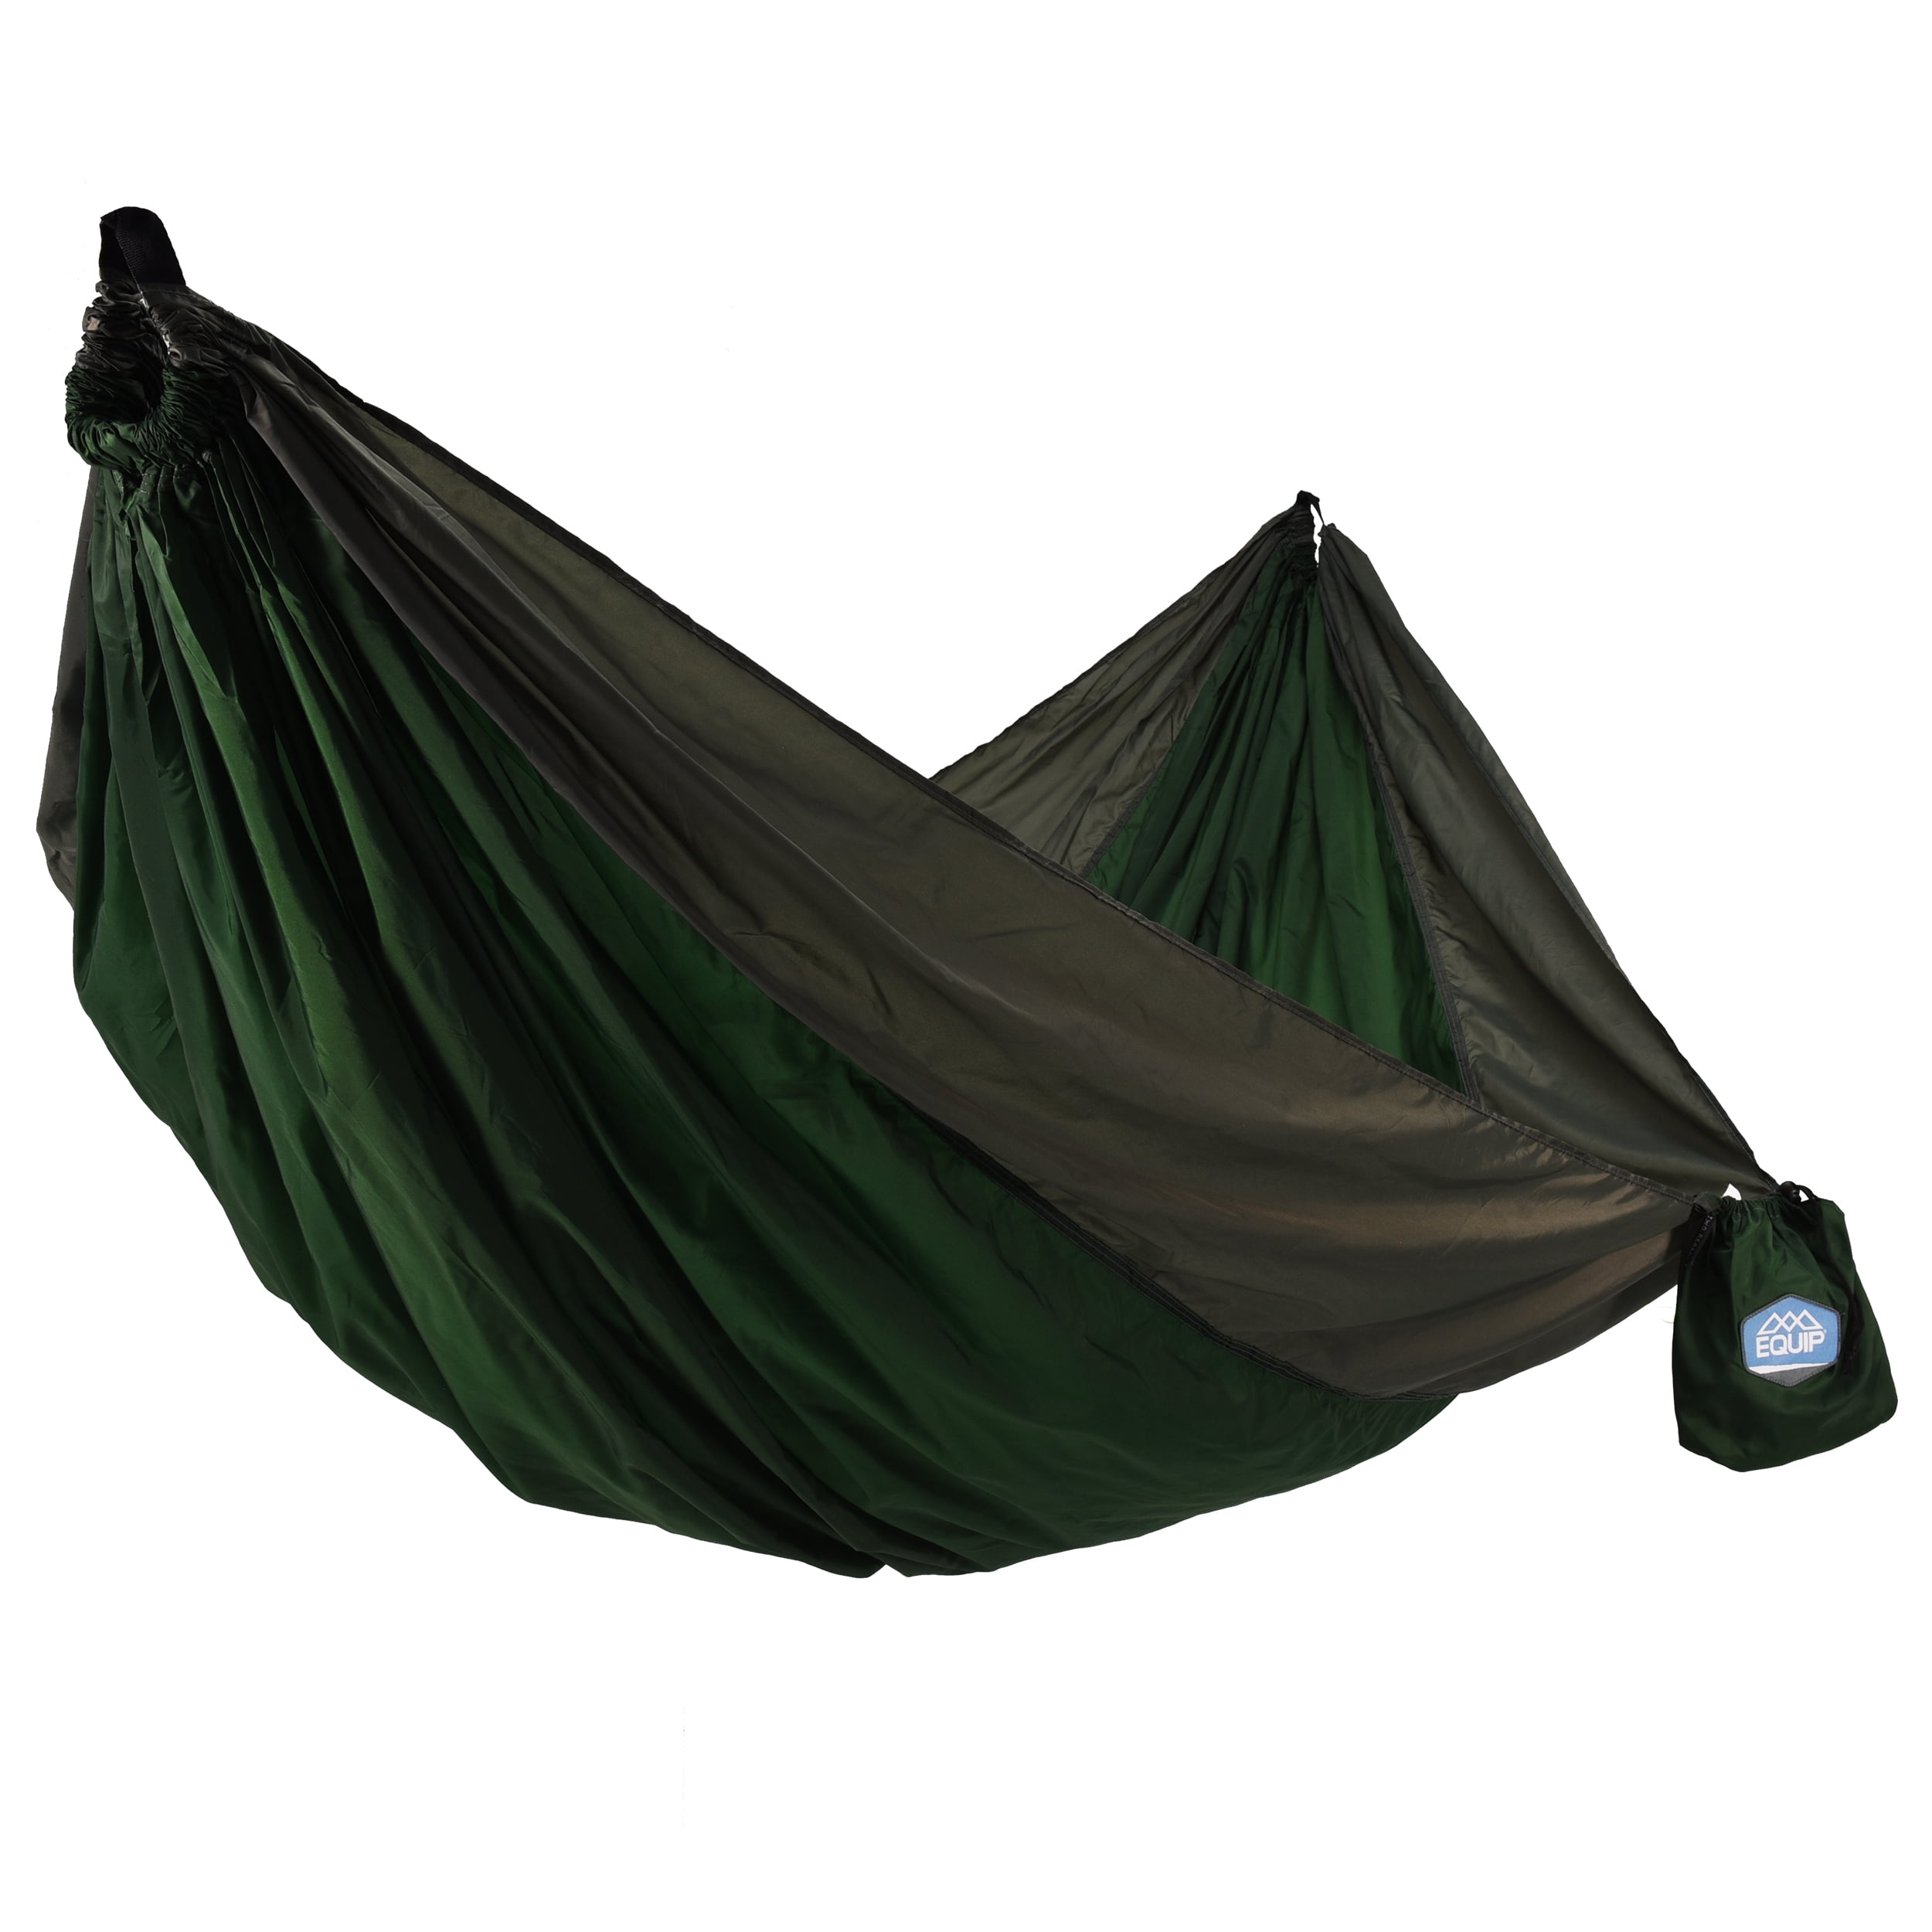 New Kid Size Green Hammock with Additional Straps and Hardware 